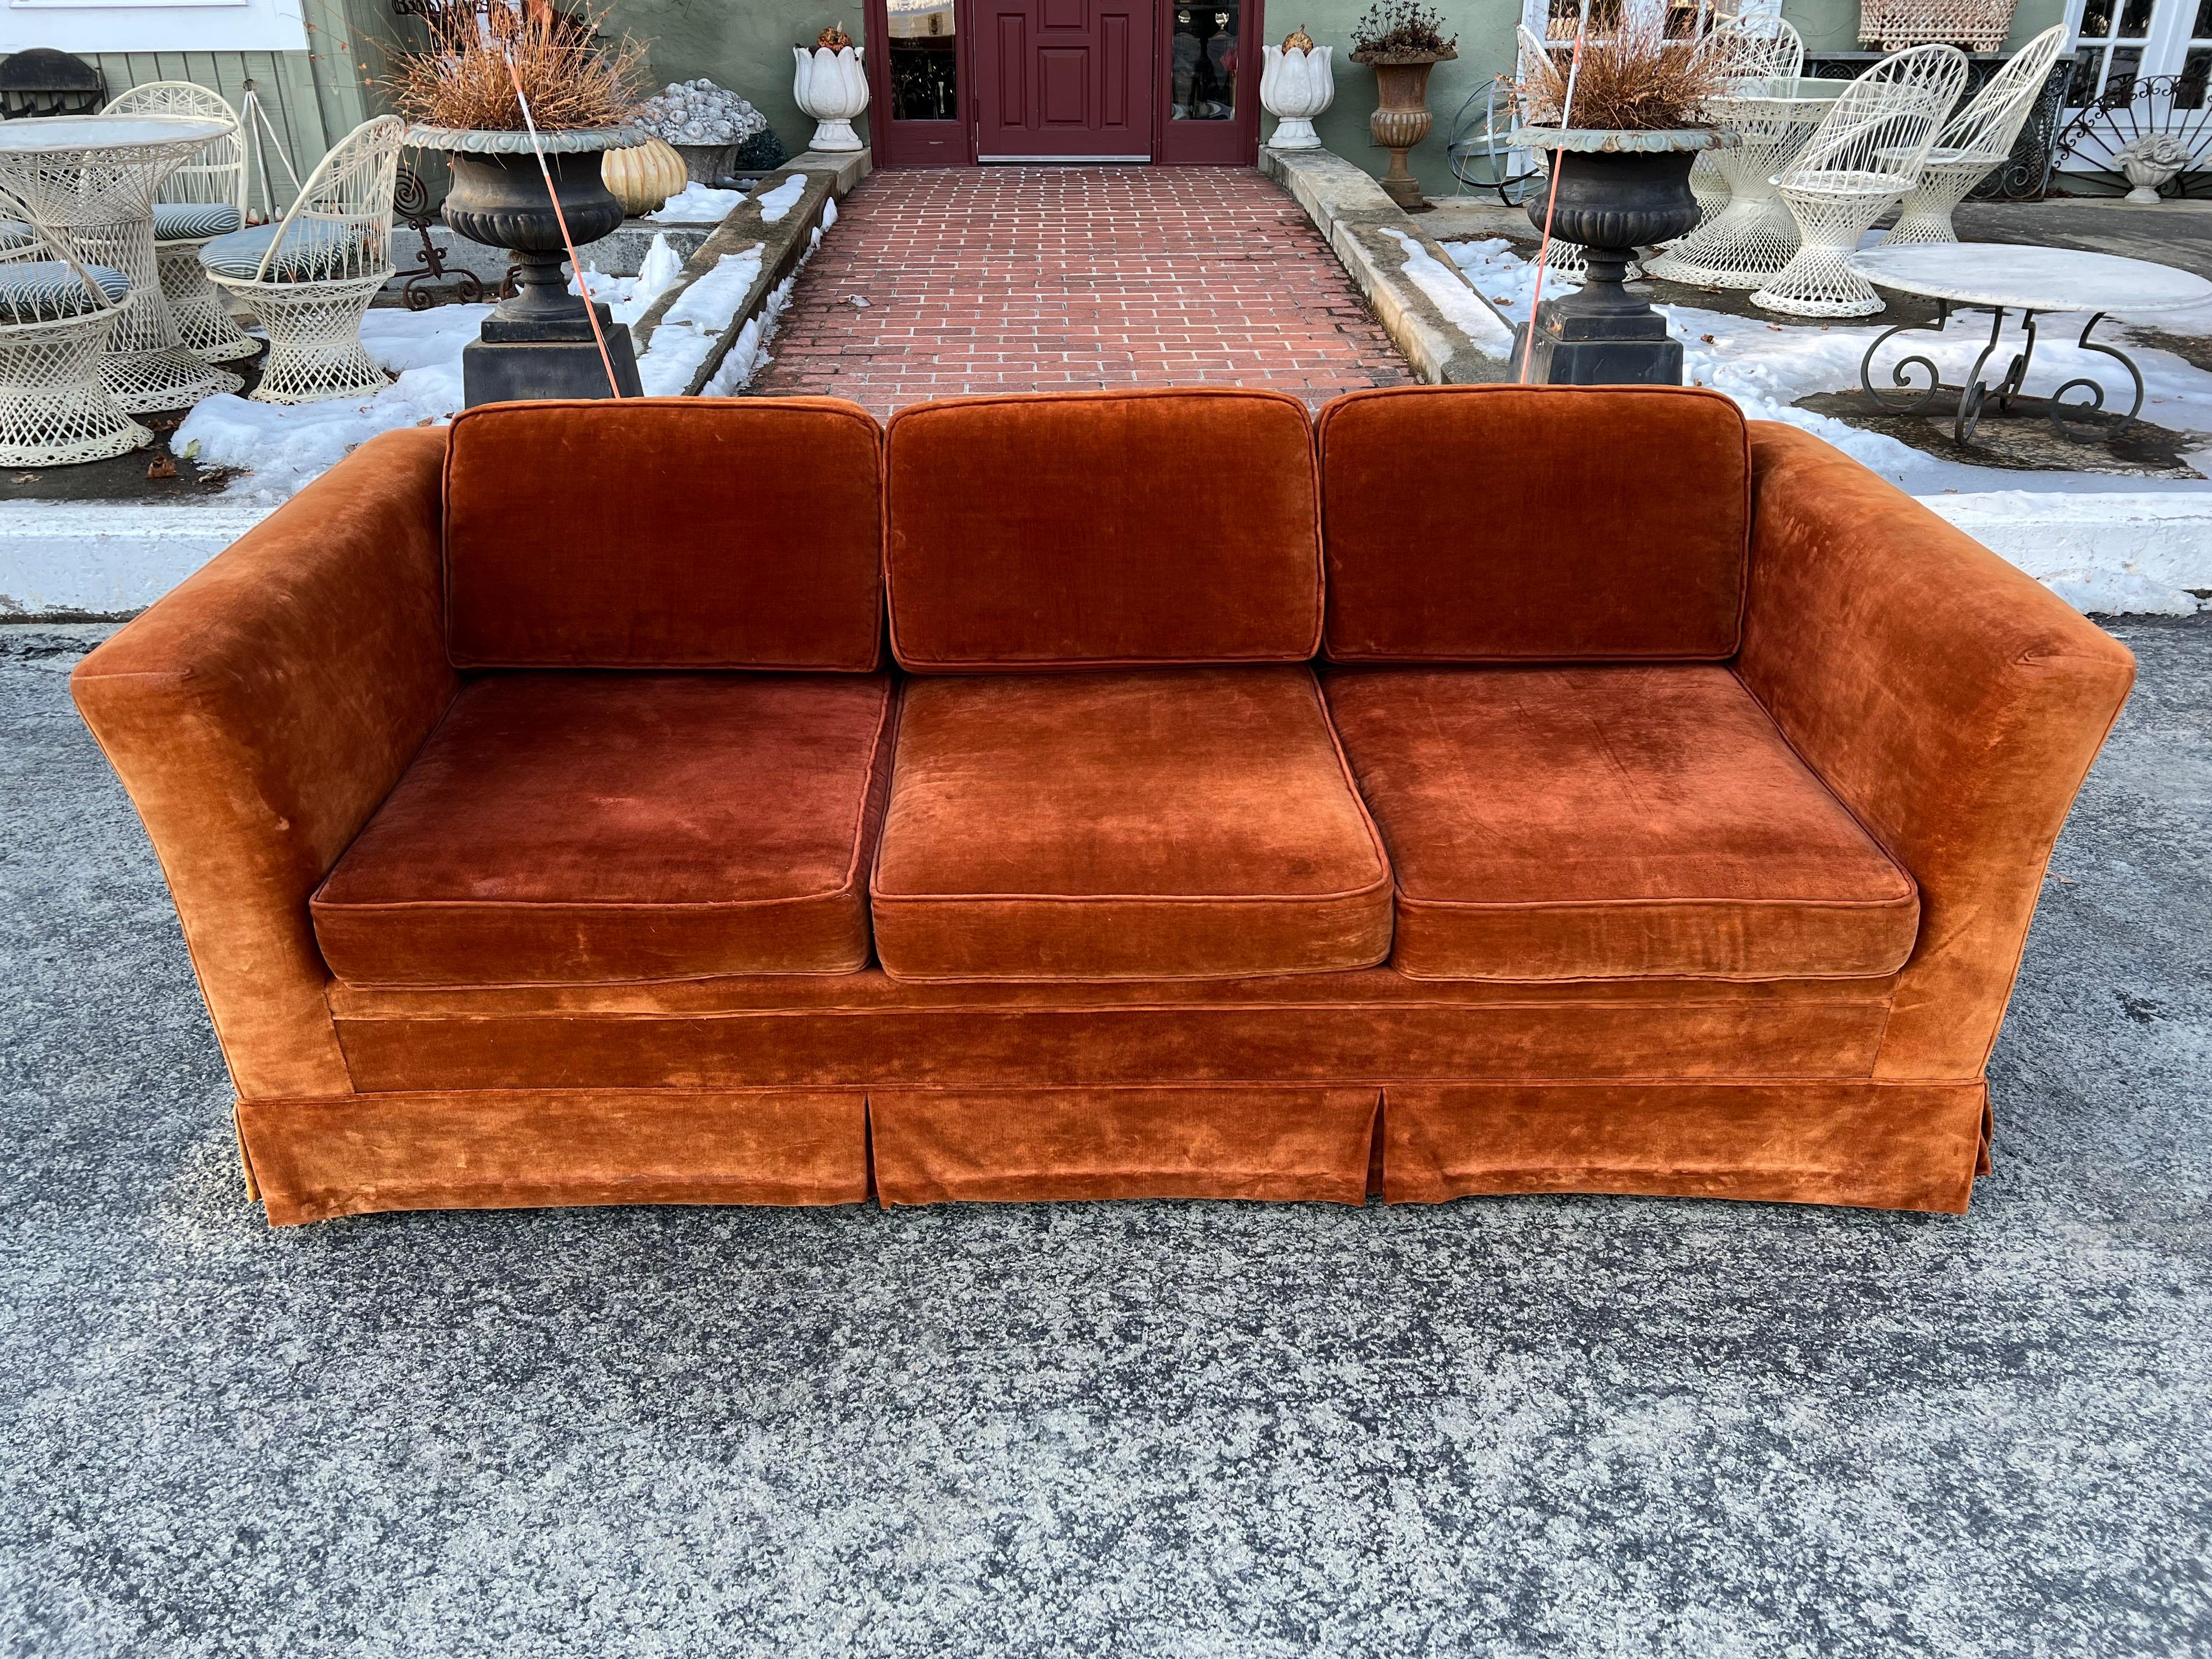 Vintage Velvet sofa in Burnt Orange. Classic tuxedo style sofa with clean minimalist lines. Sink into this luscious beauty . Overall very good vintage condition. 
Seat depth is 22